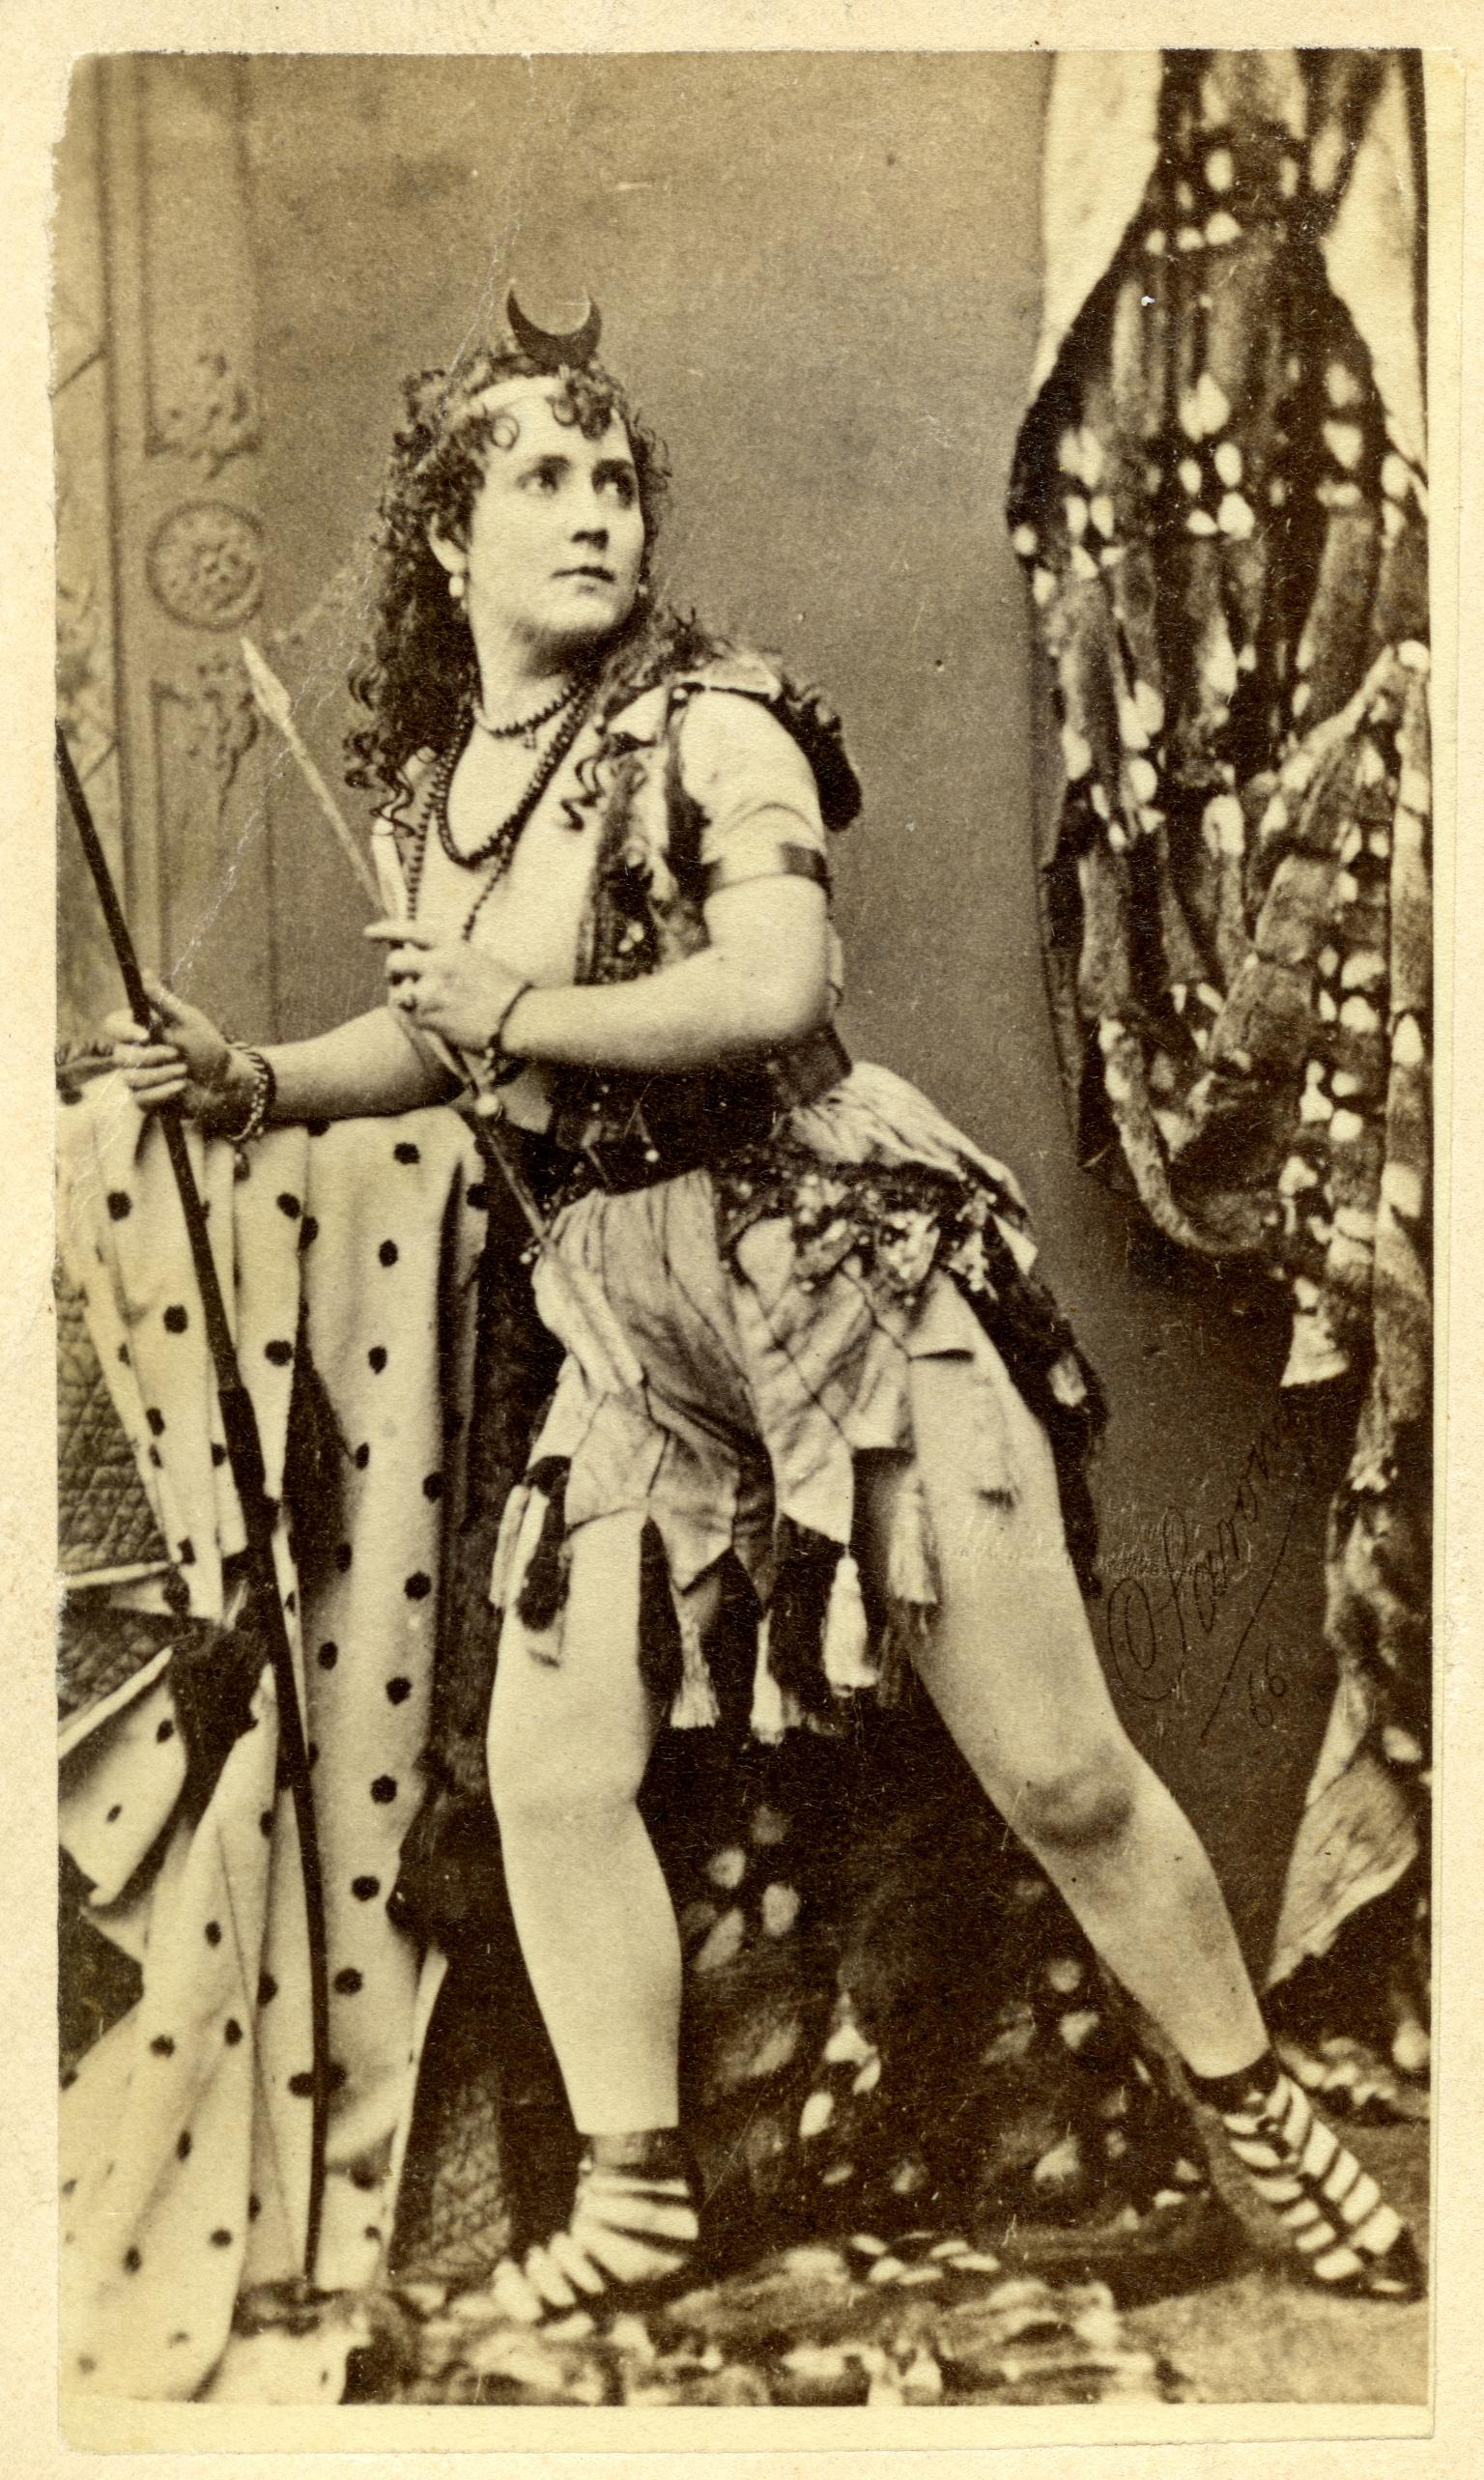 Full body portrait of woman with legs slightly bent and body shifted to one side in an active pose, wearing armor. 